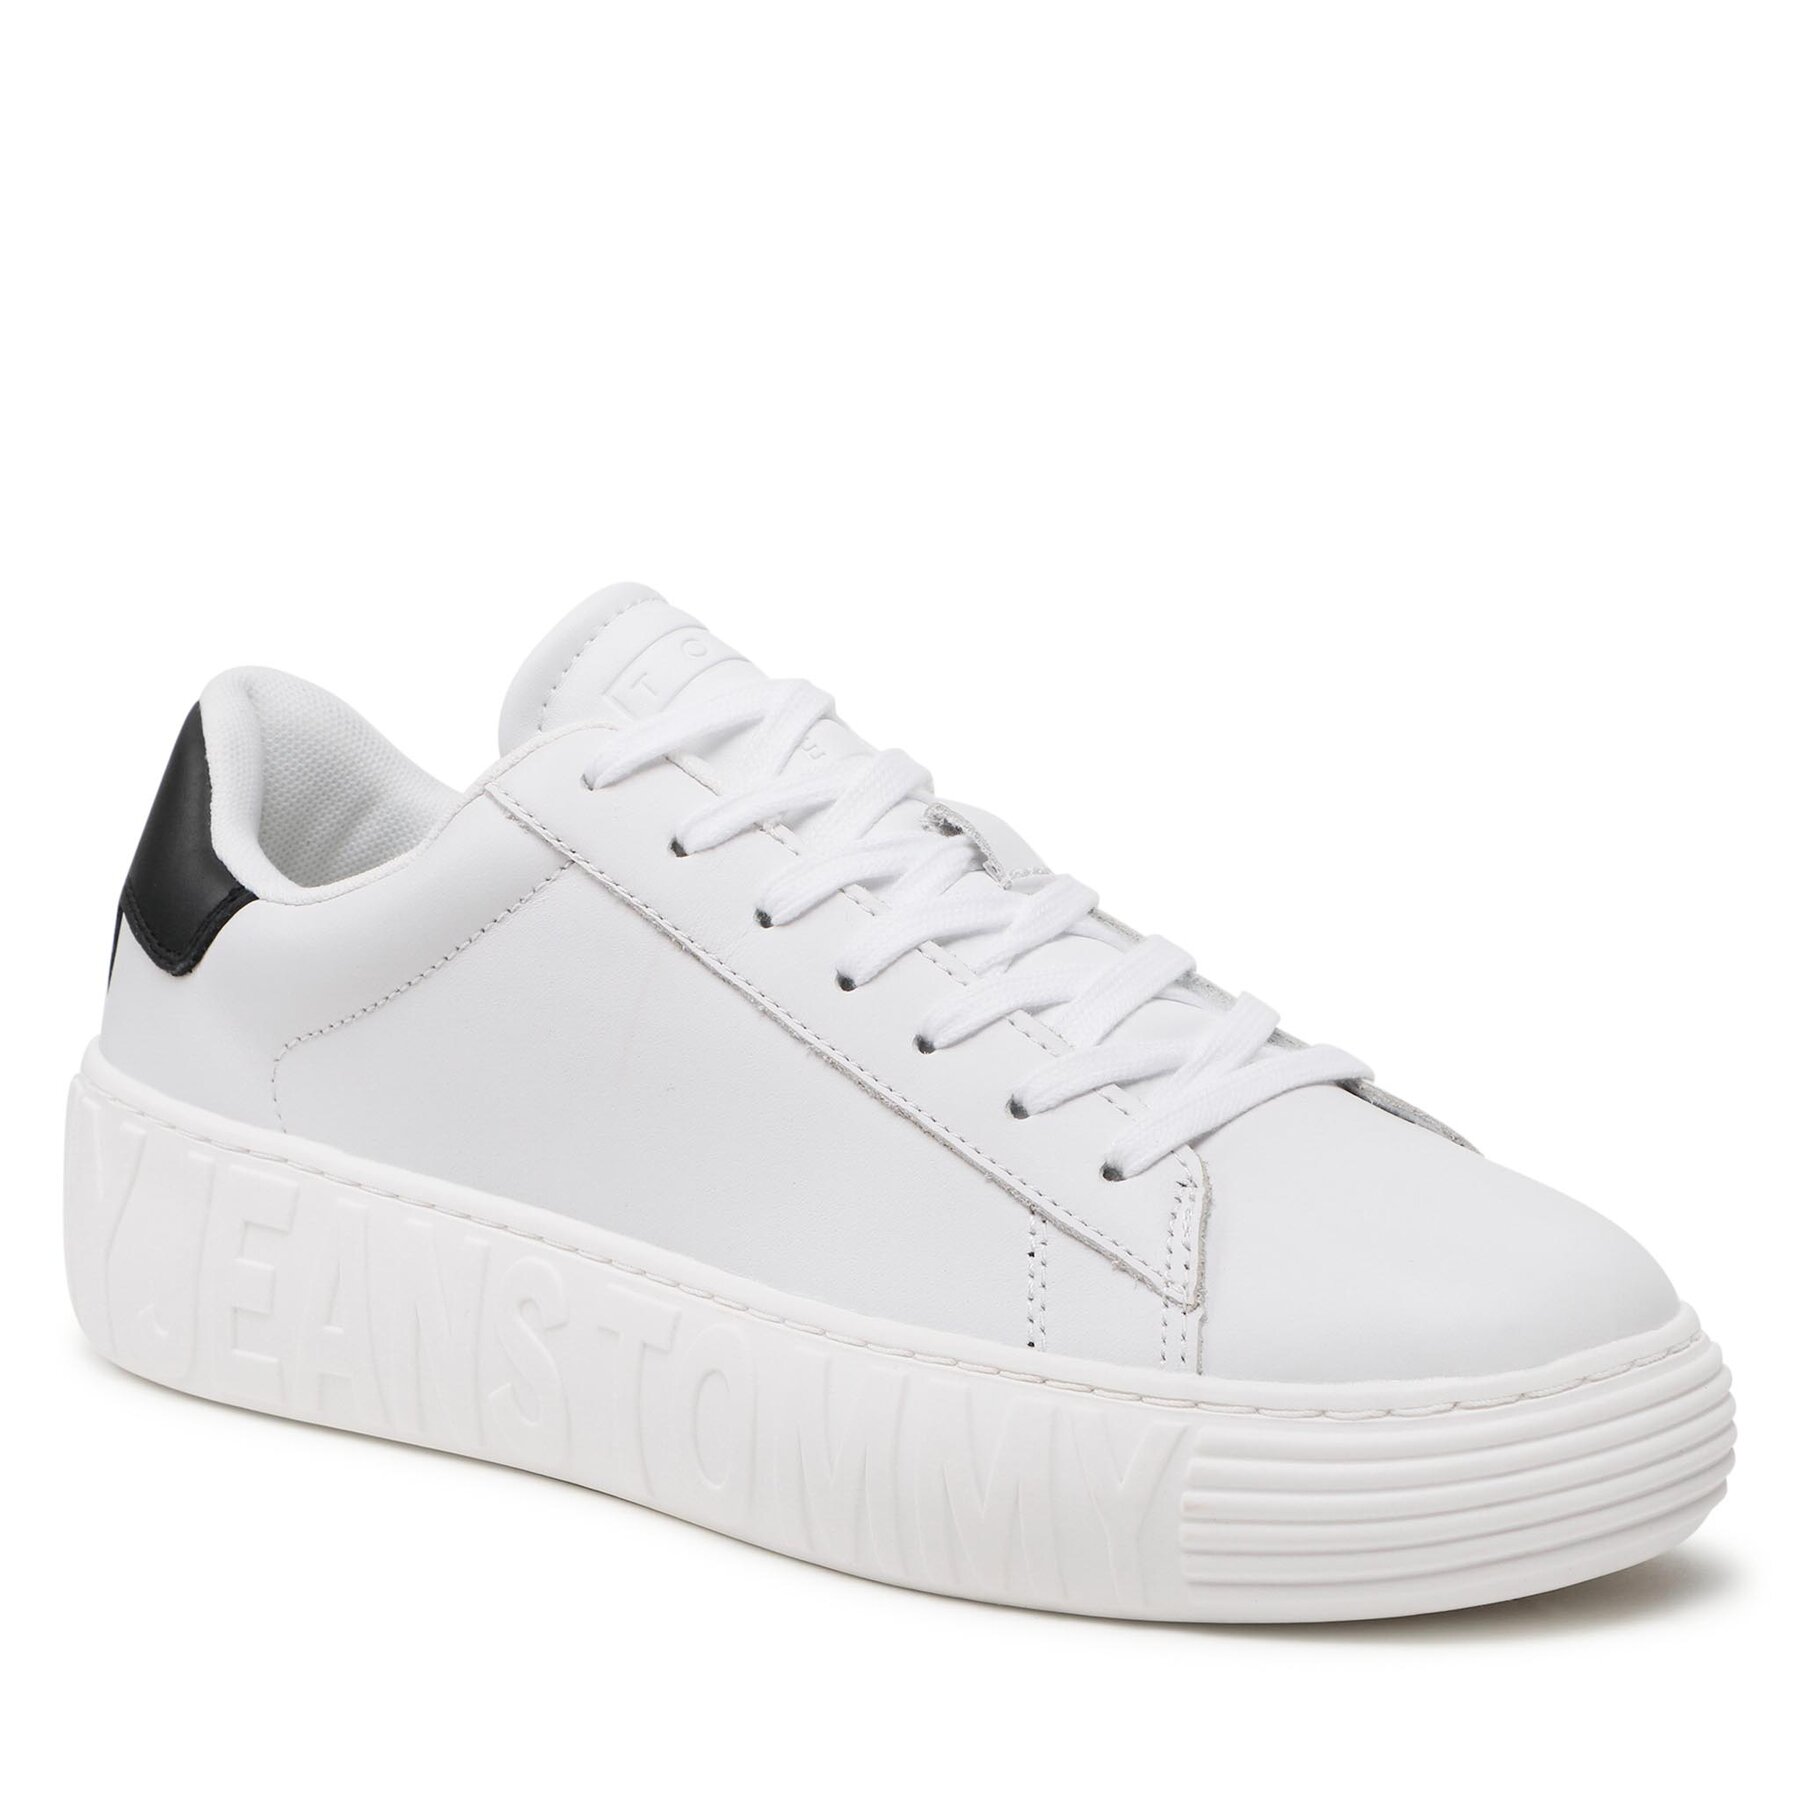 Sneakers Tommy Jeans Leather Outsole EM0EM01159 White YBR 44